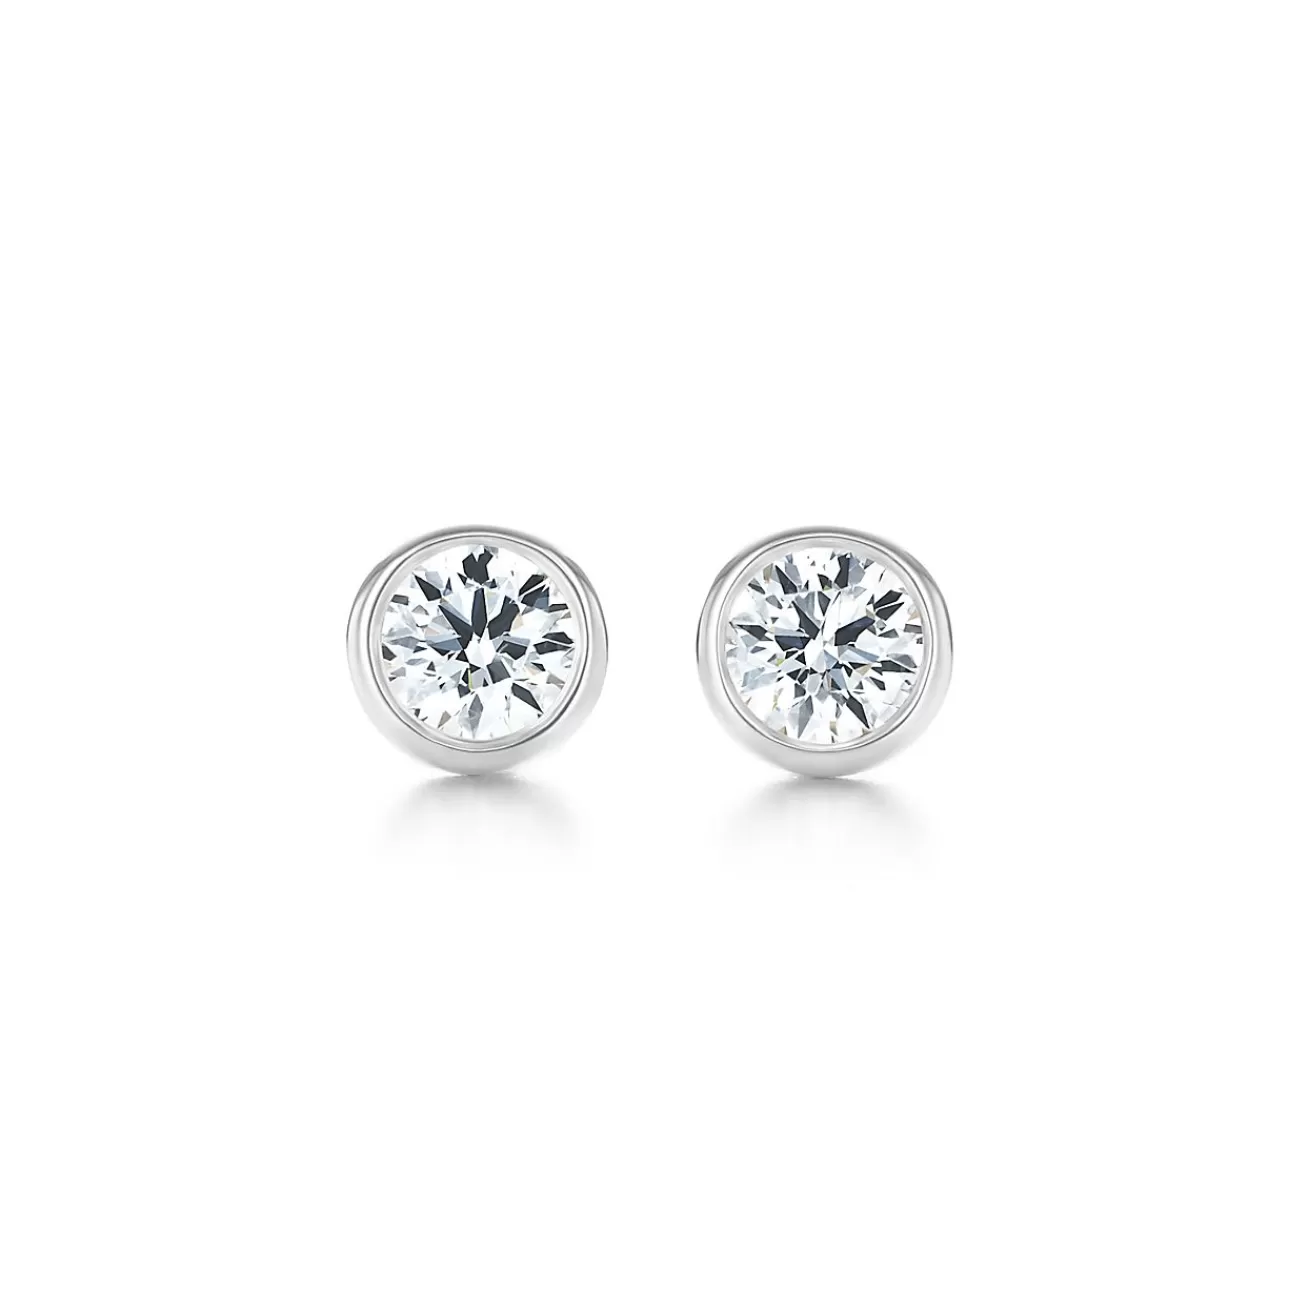 Tiffany & Co. Elsa Peretti® Diamonds by the Yard® earrings in platinum. | ^ Earrings | Gifts for Her